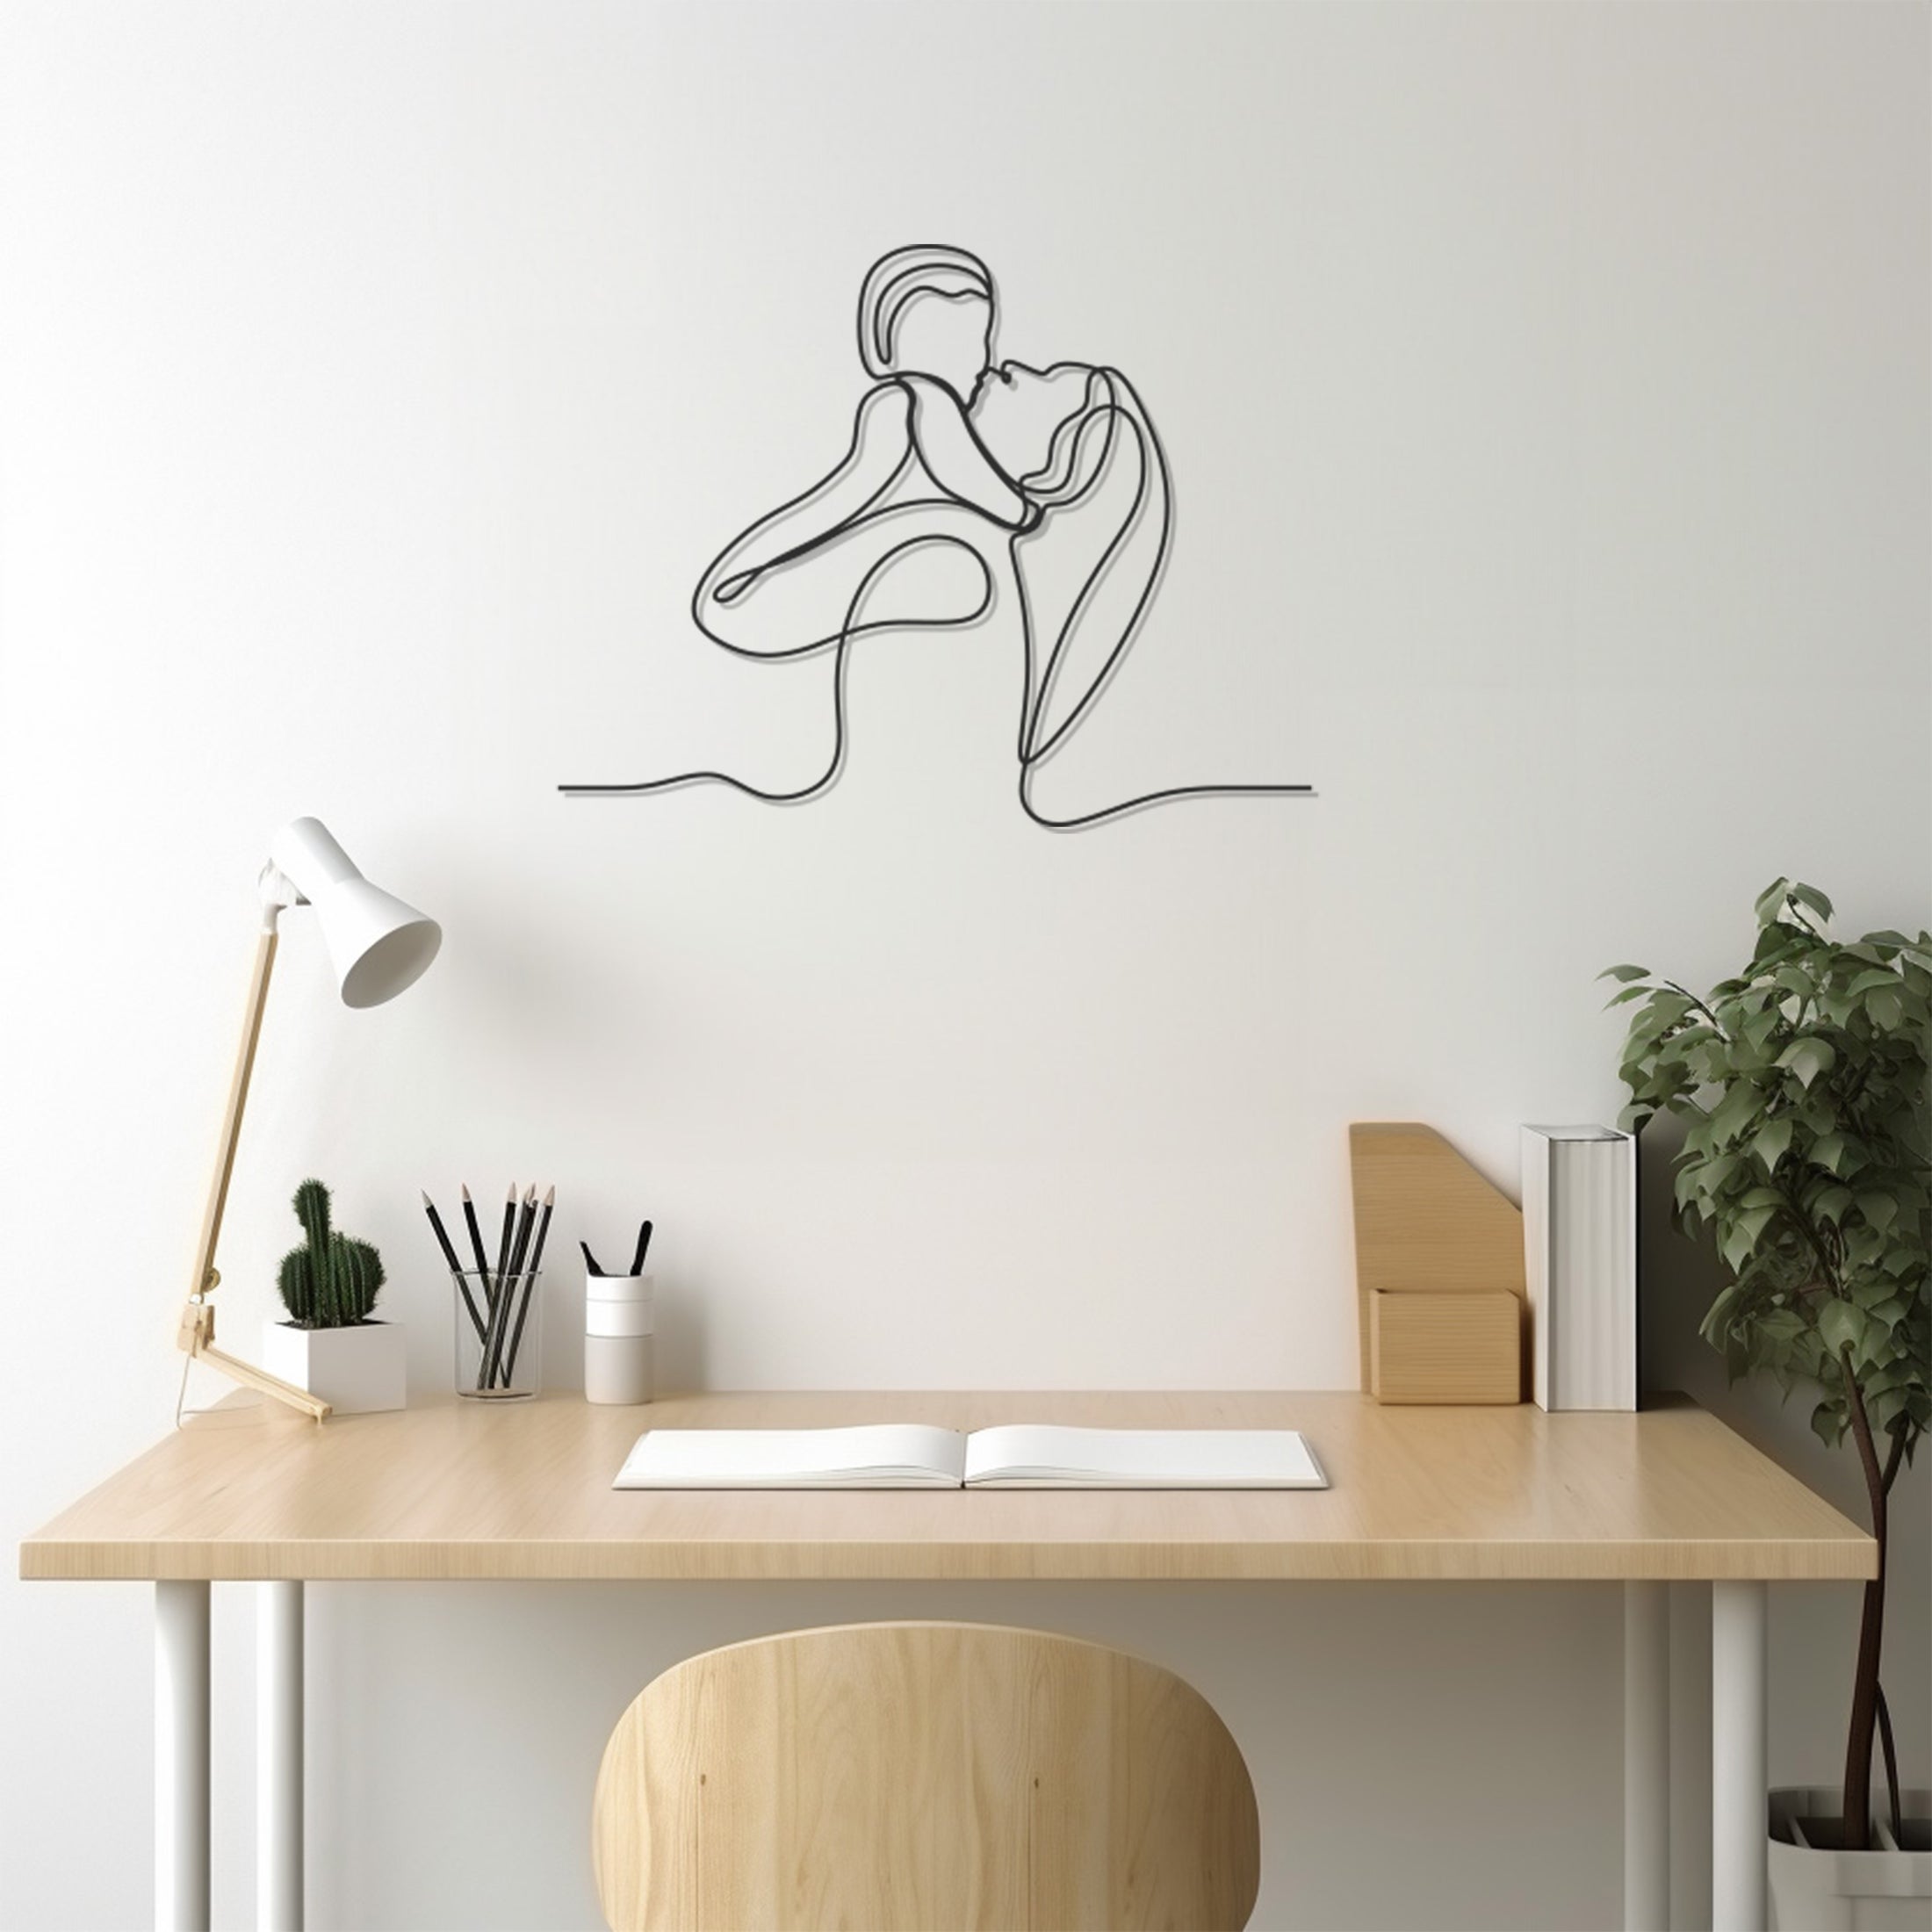 A Mother With Her Baby In Her Arms Silhouette Drawn With Metal Wall Art Lining Technique